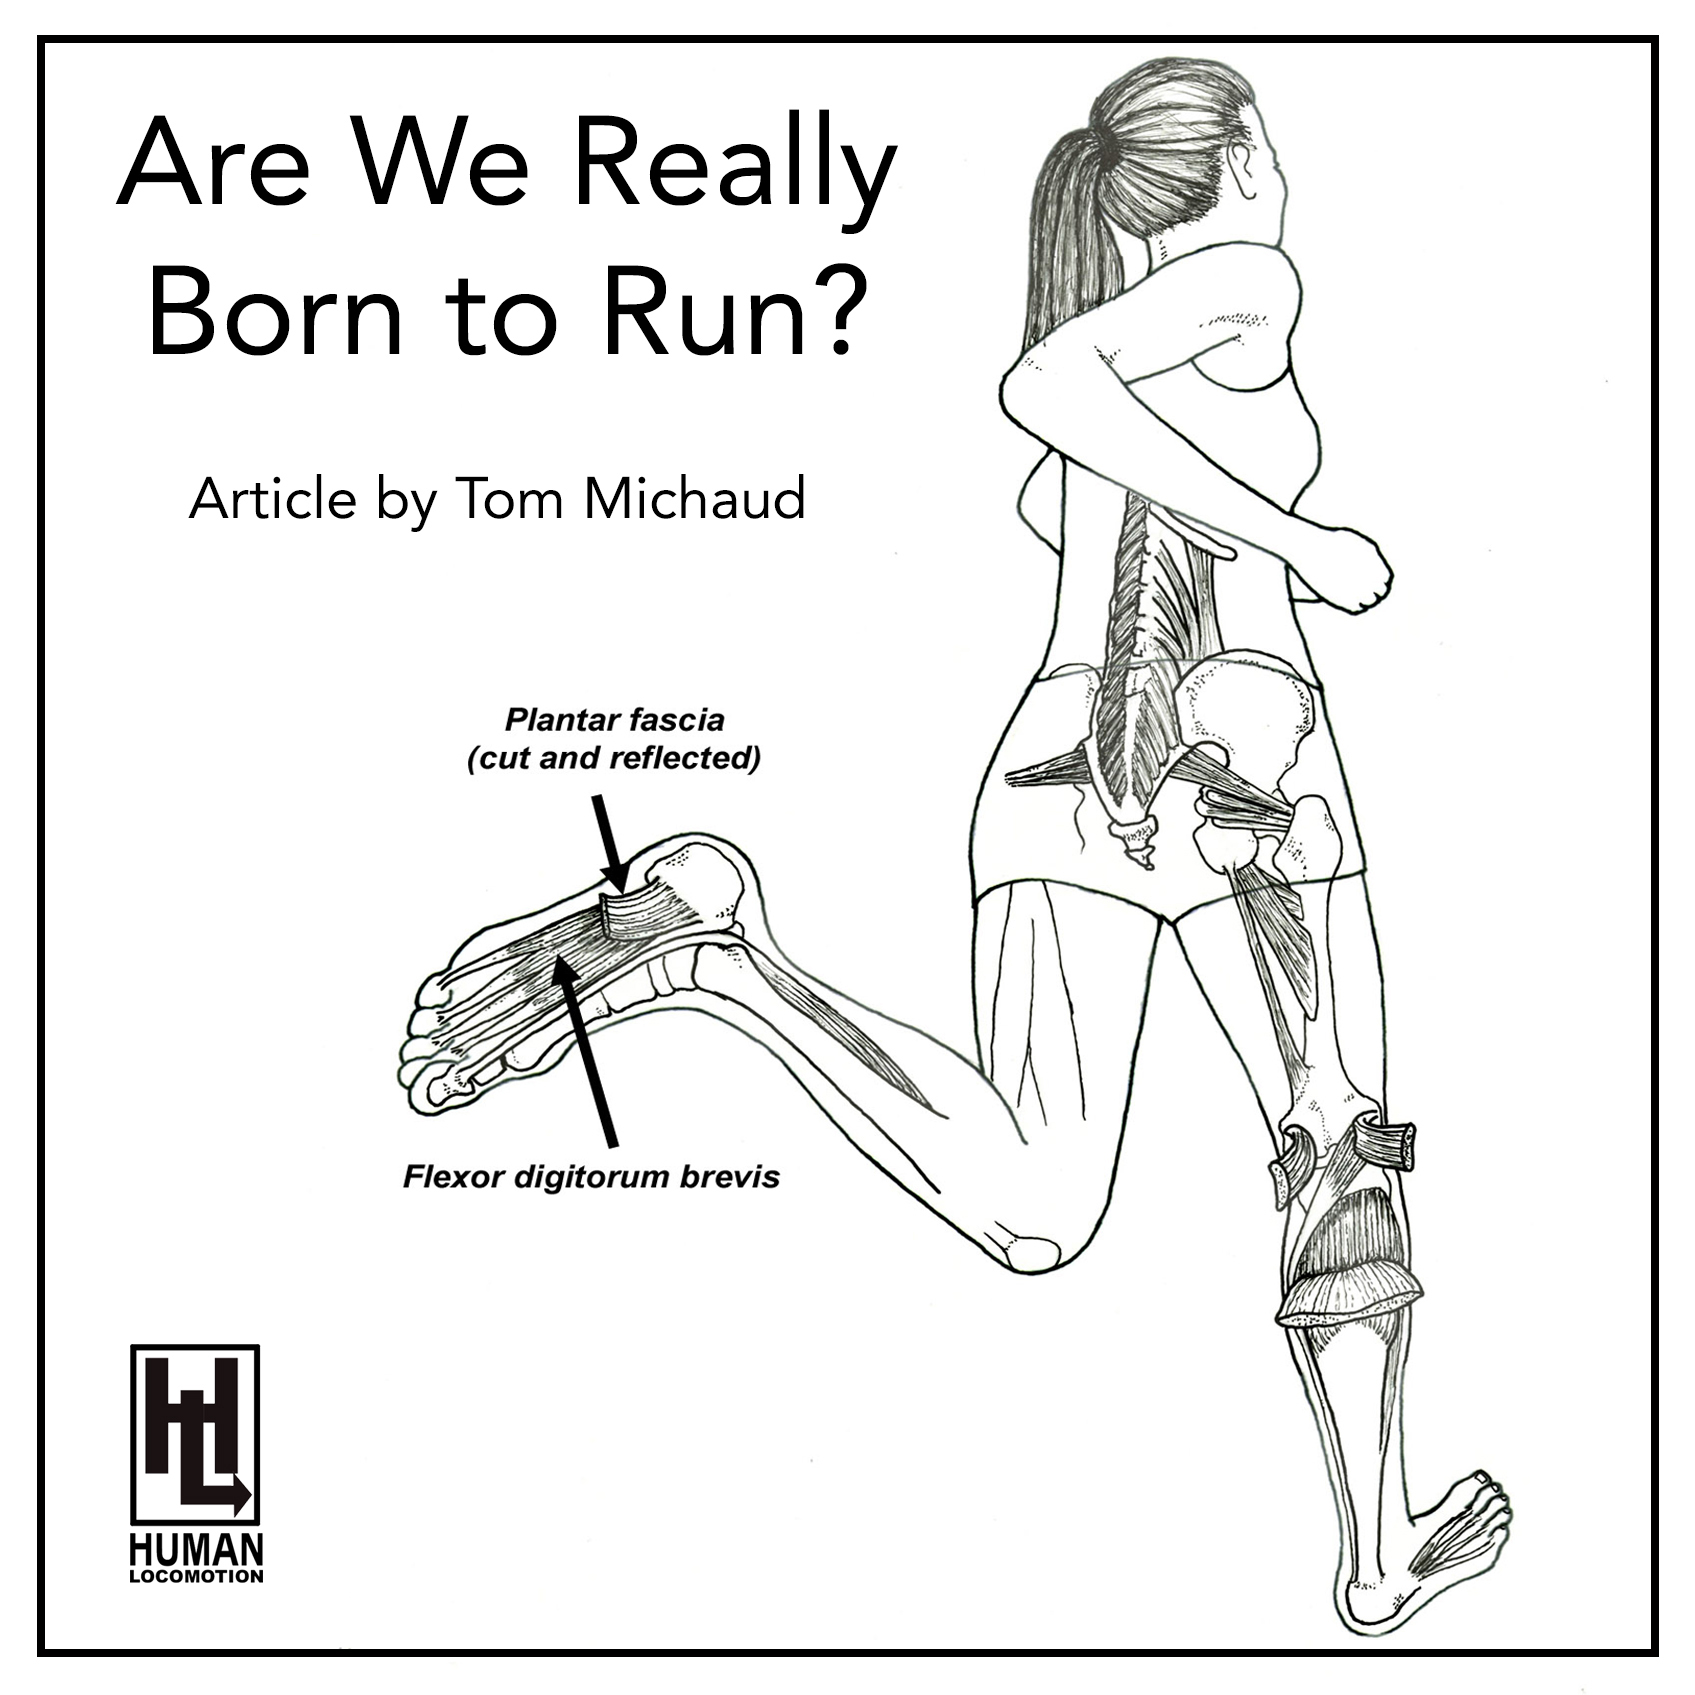 Are We Really Born To Run? There is evidence that debunks the popular running theory.